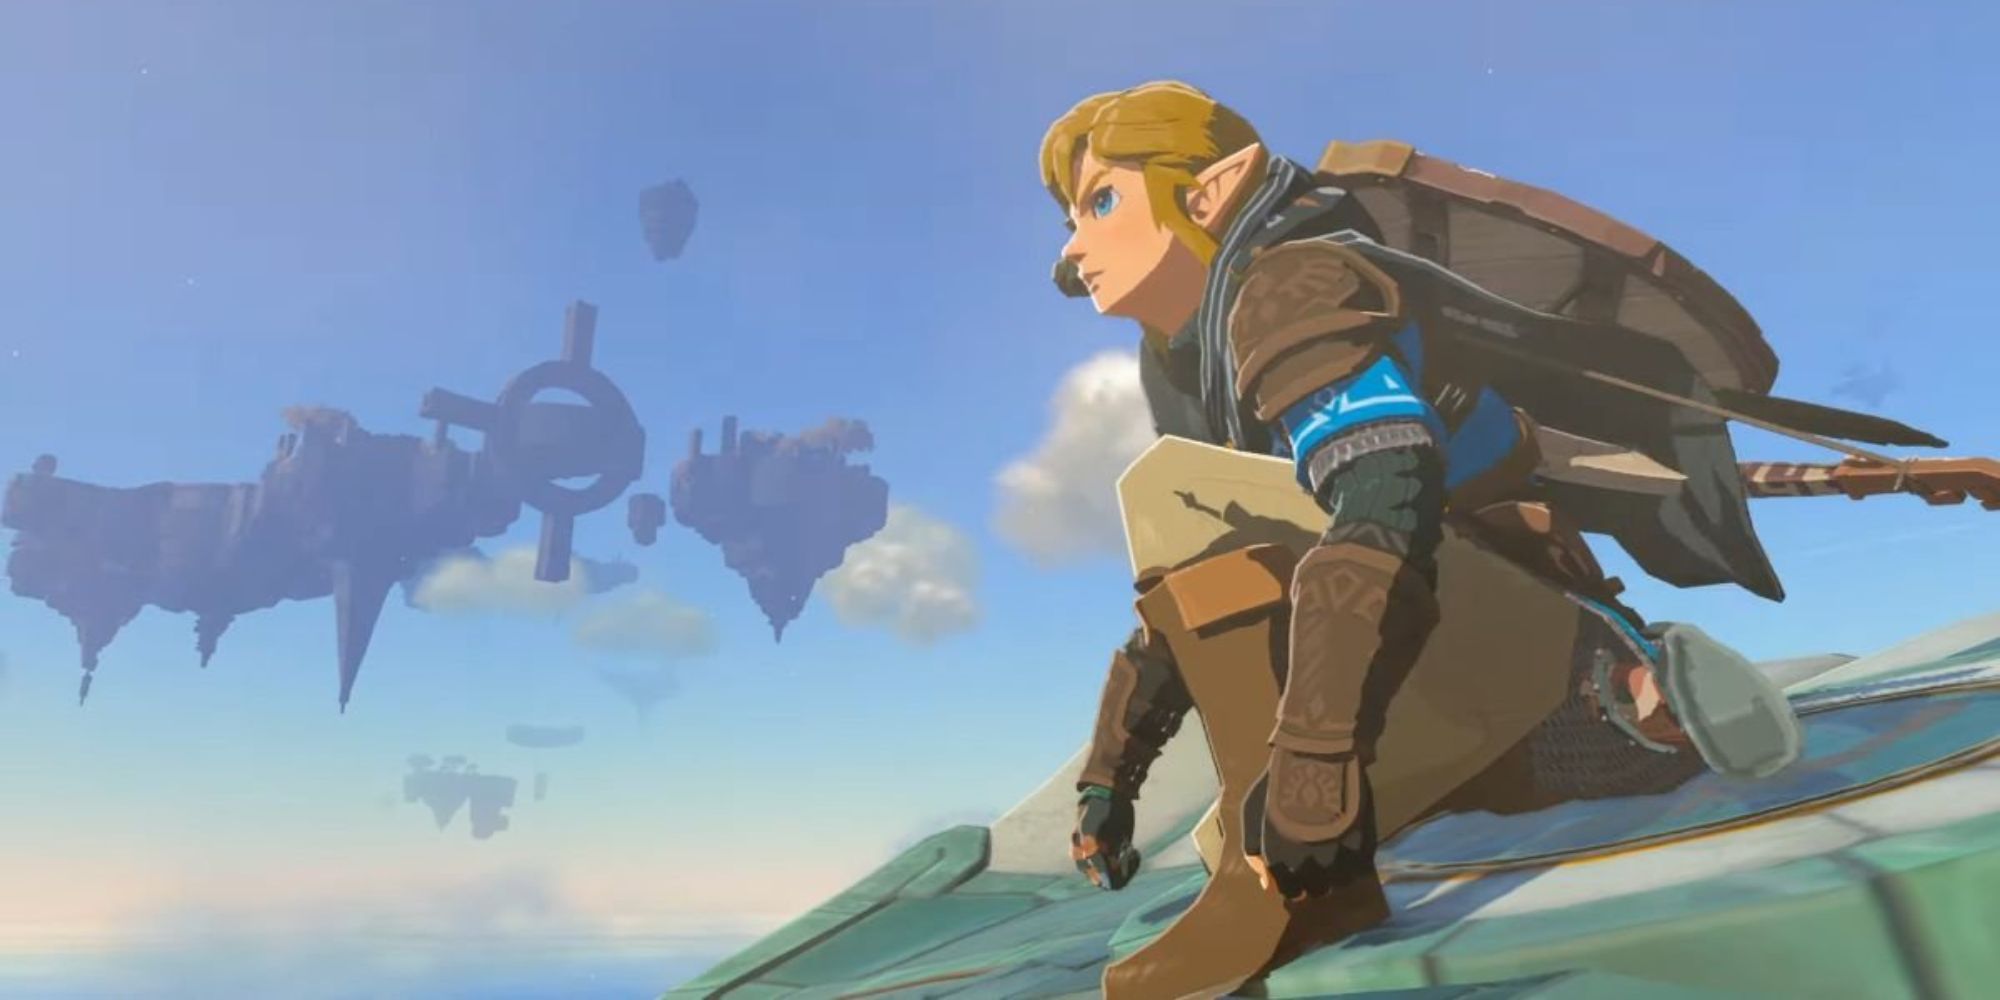 The protagonist Link rides a Zonai Glider next to sky islands in The Legend of Zelda Tears of the Kingdom